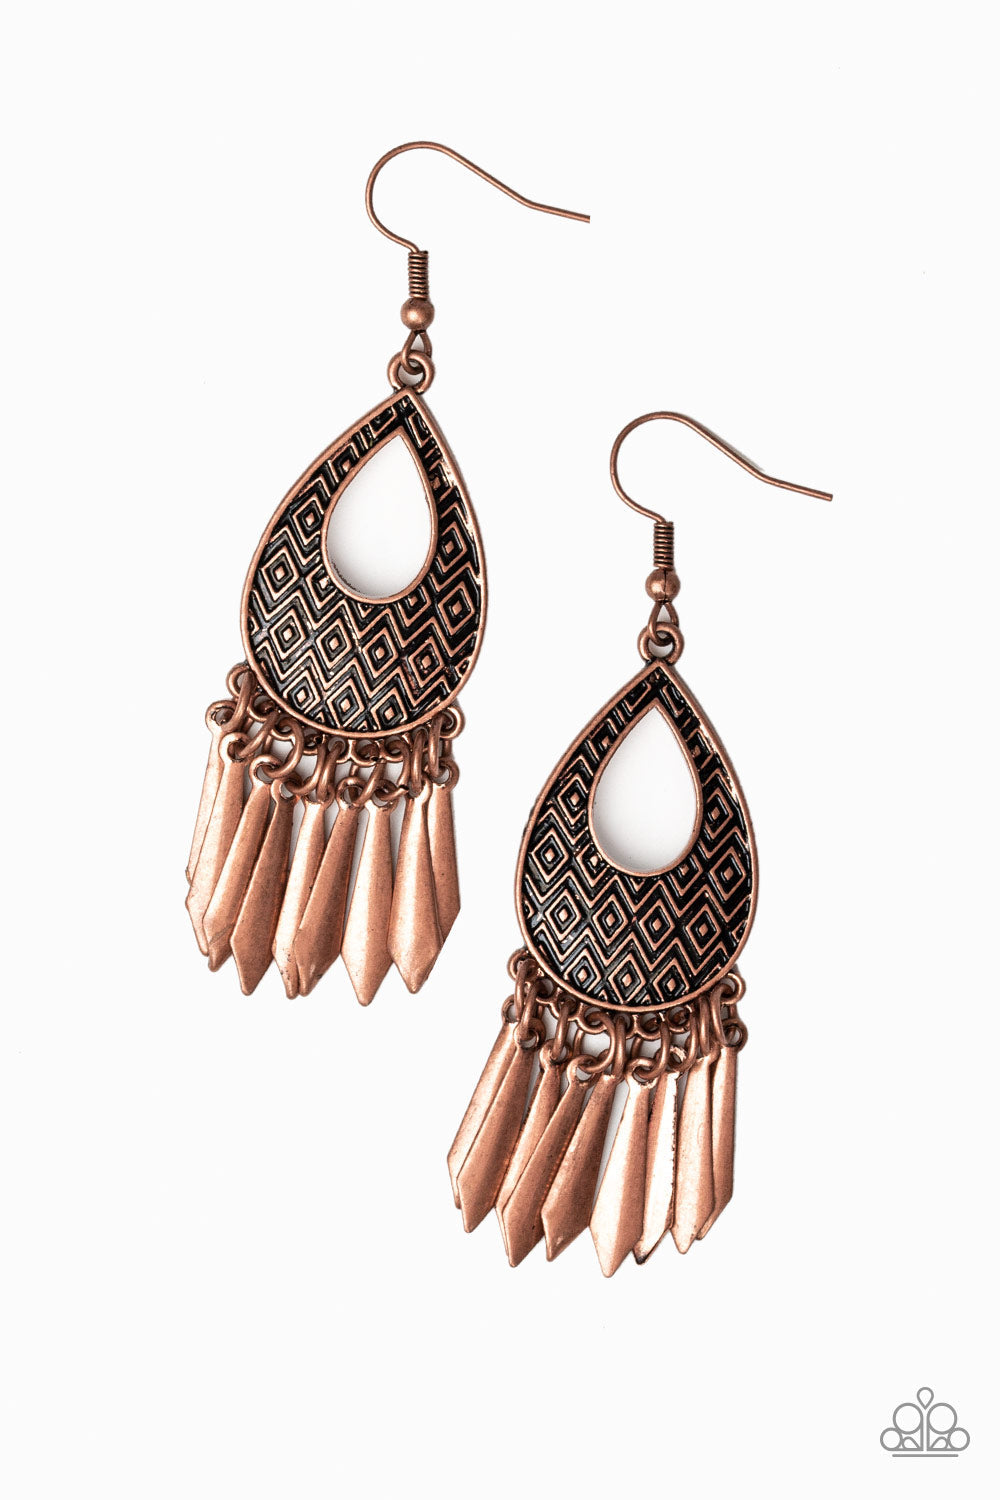 Metallic Funk - Copper Earrings - Paparazzi Accessories - Geometric pattern a glistening copper teardrop gives way to a fringe of flared copper rods. Earring attaches to a standard fishhook fitting. 